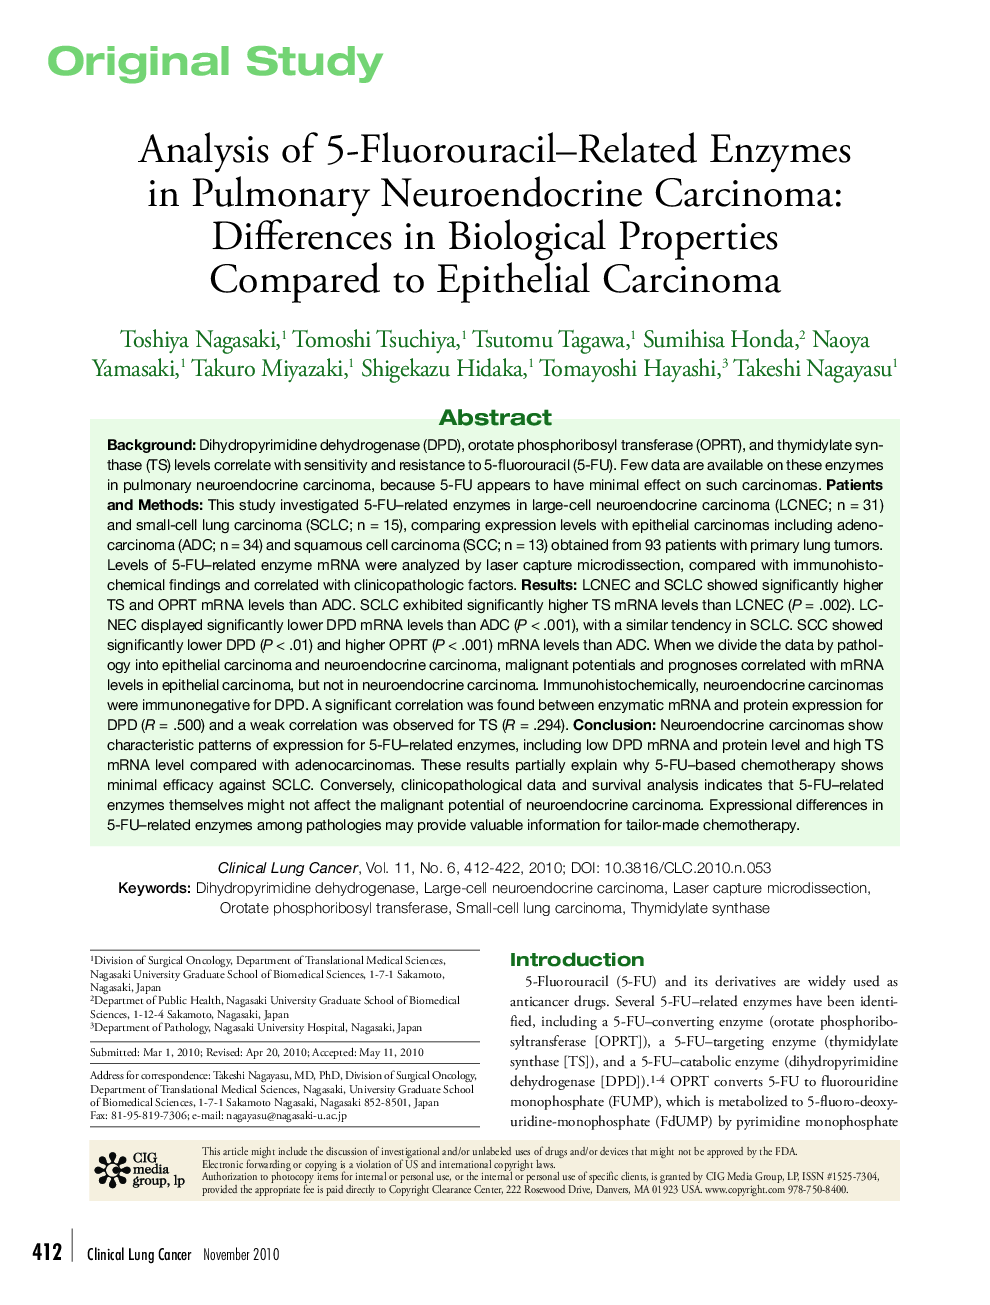 Analysis of 5-Fluorouracil–Related Enzymes in Pulmonary Neuroendocrine Carcinoma: Differences in Biological Properties Compared to Epithelial Carcinoma 